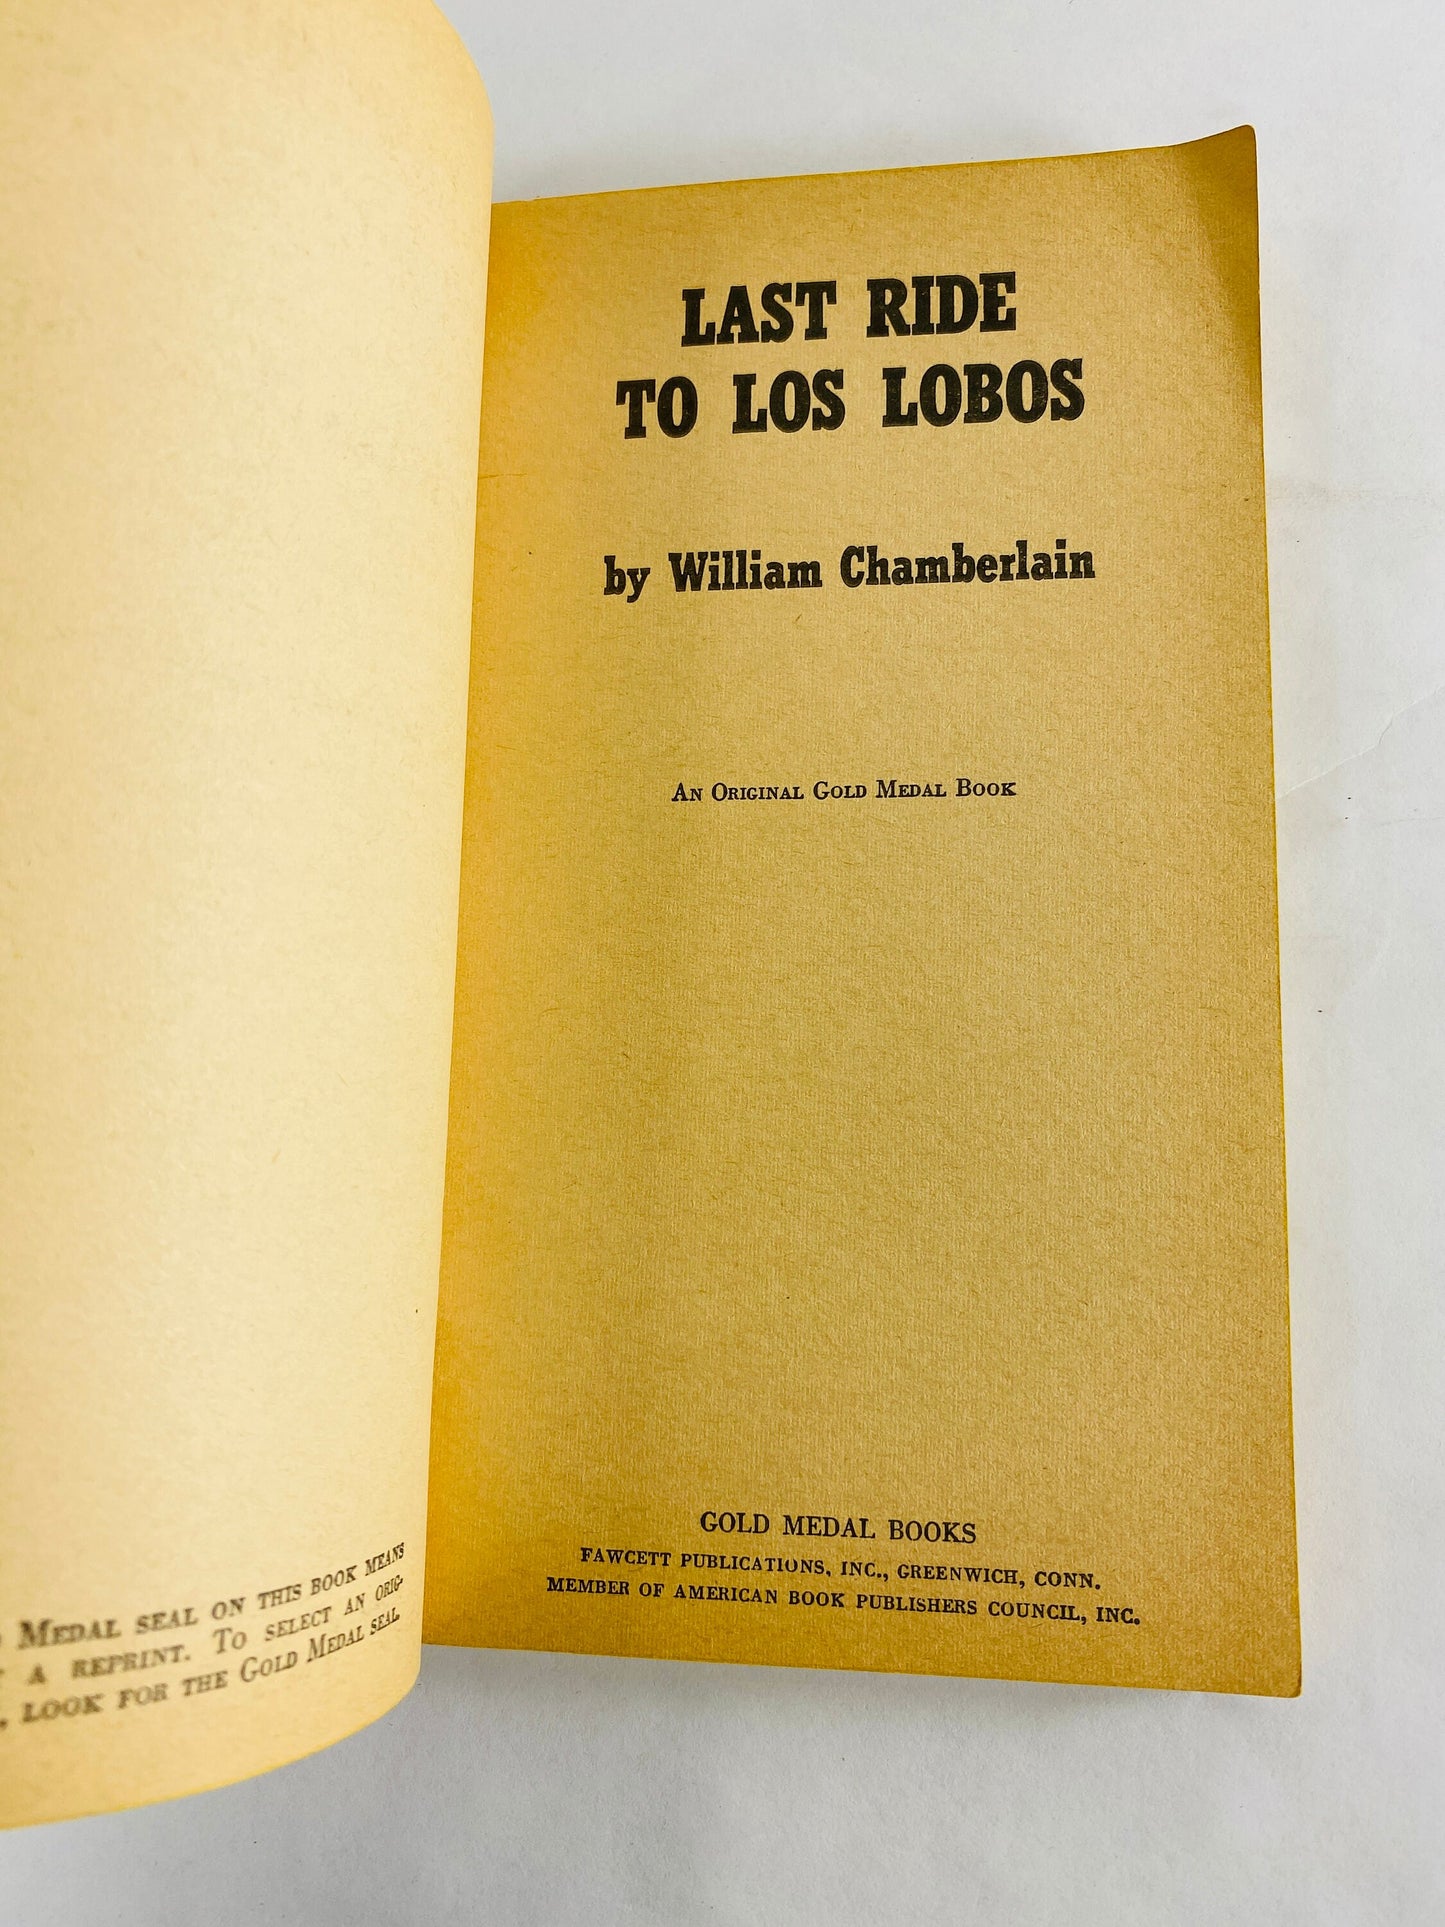 1964 Last Ride to Los Lobos Vintage Western paperback book by William Chamberlain about a man with an office job thrown on the frontier